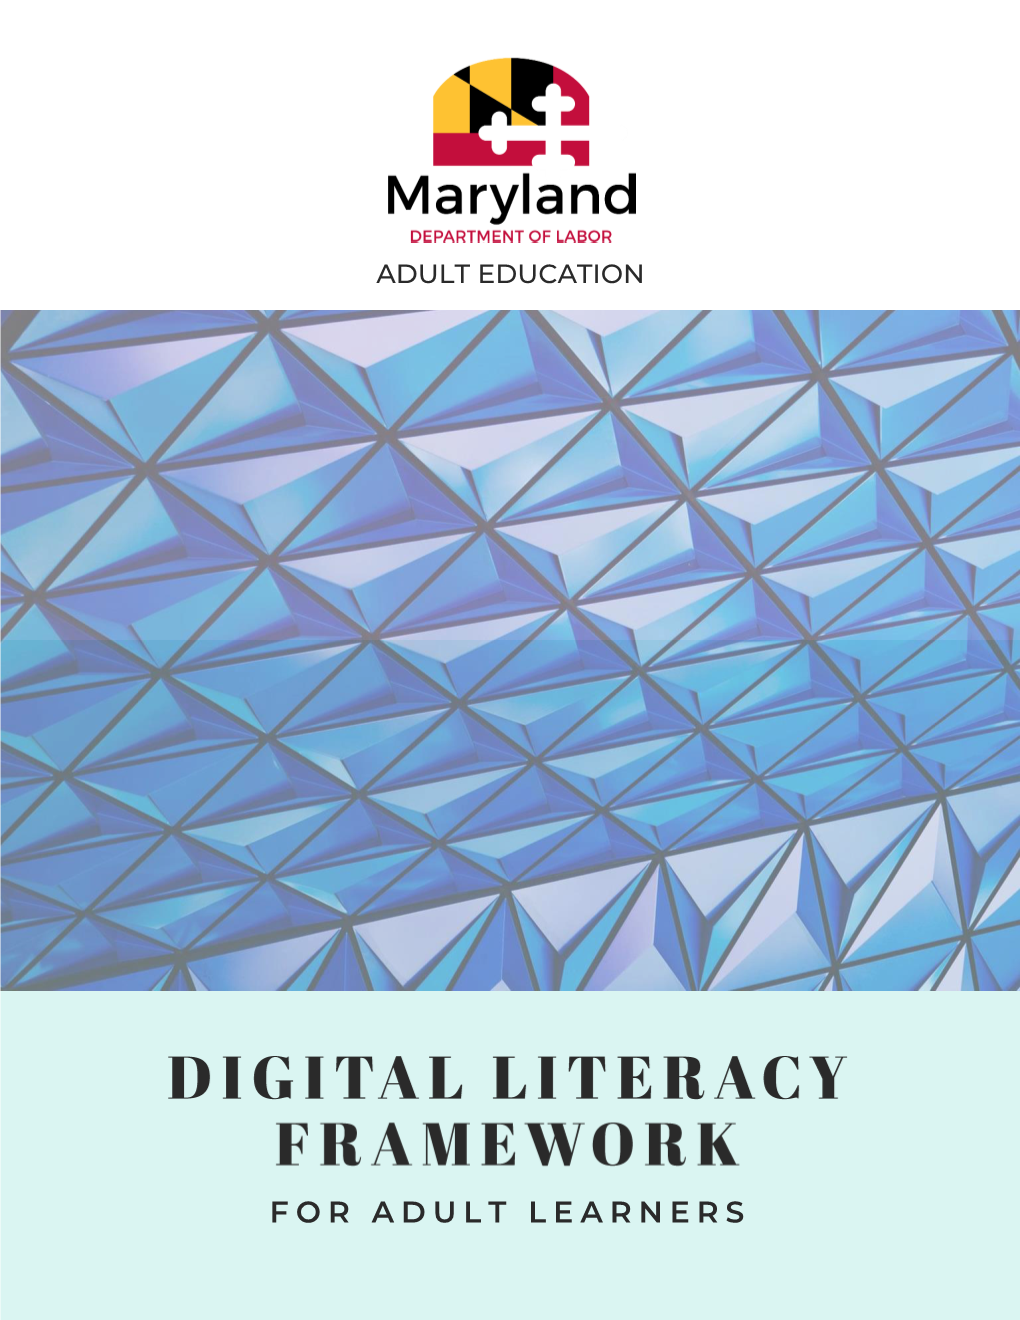 Maryland Department of Labor Digital Literacy Framework for Adult Learners